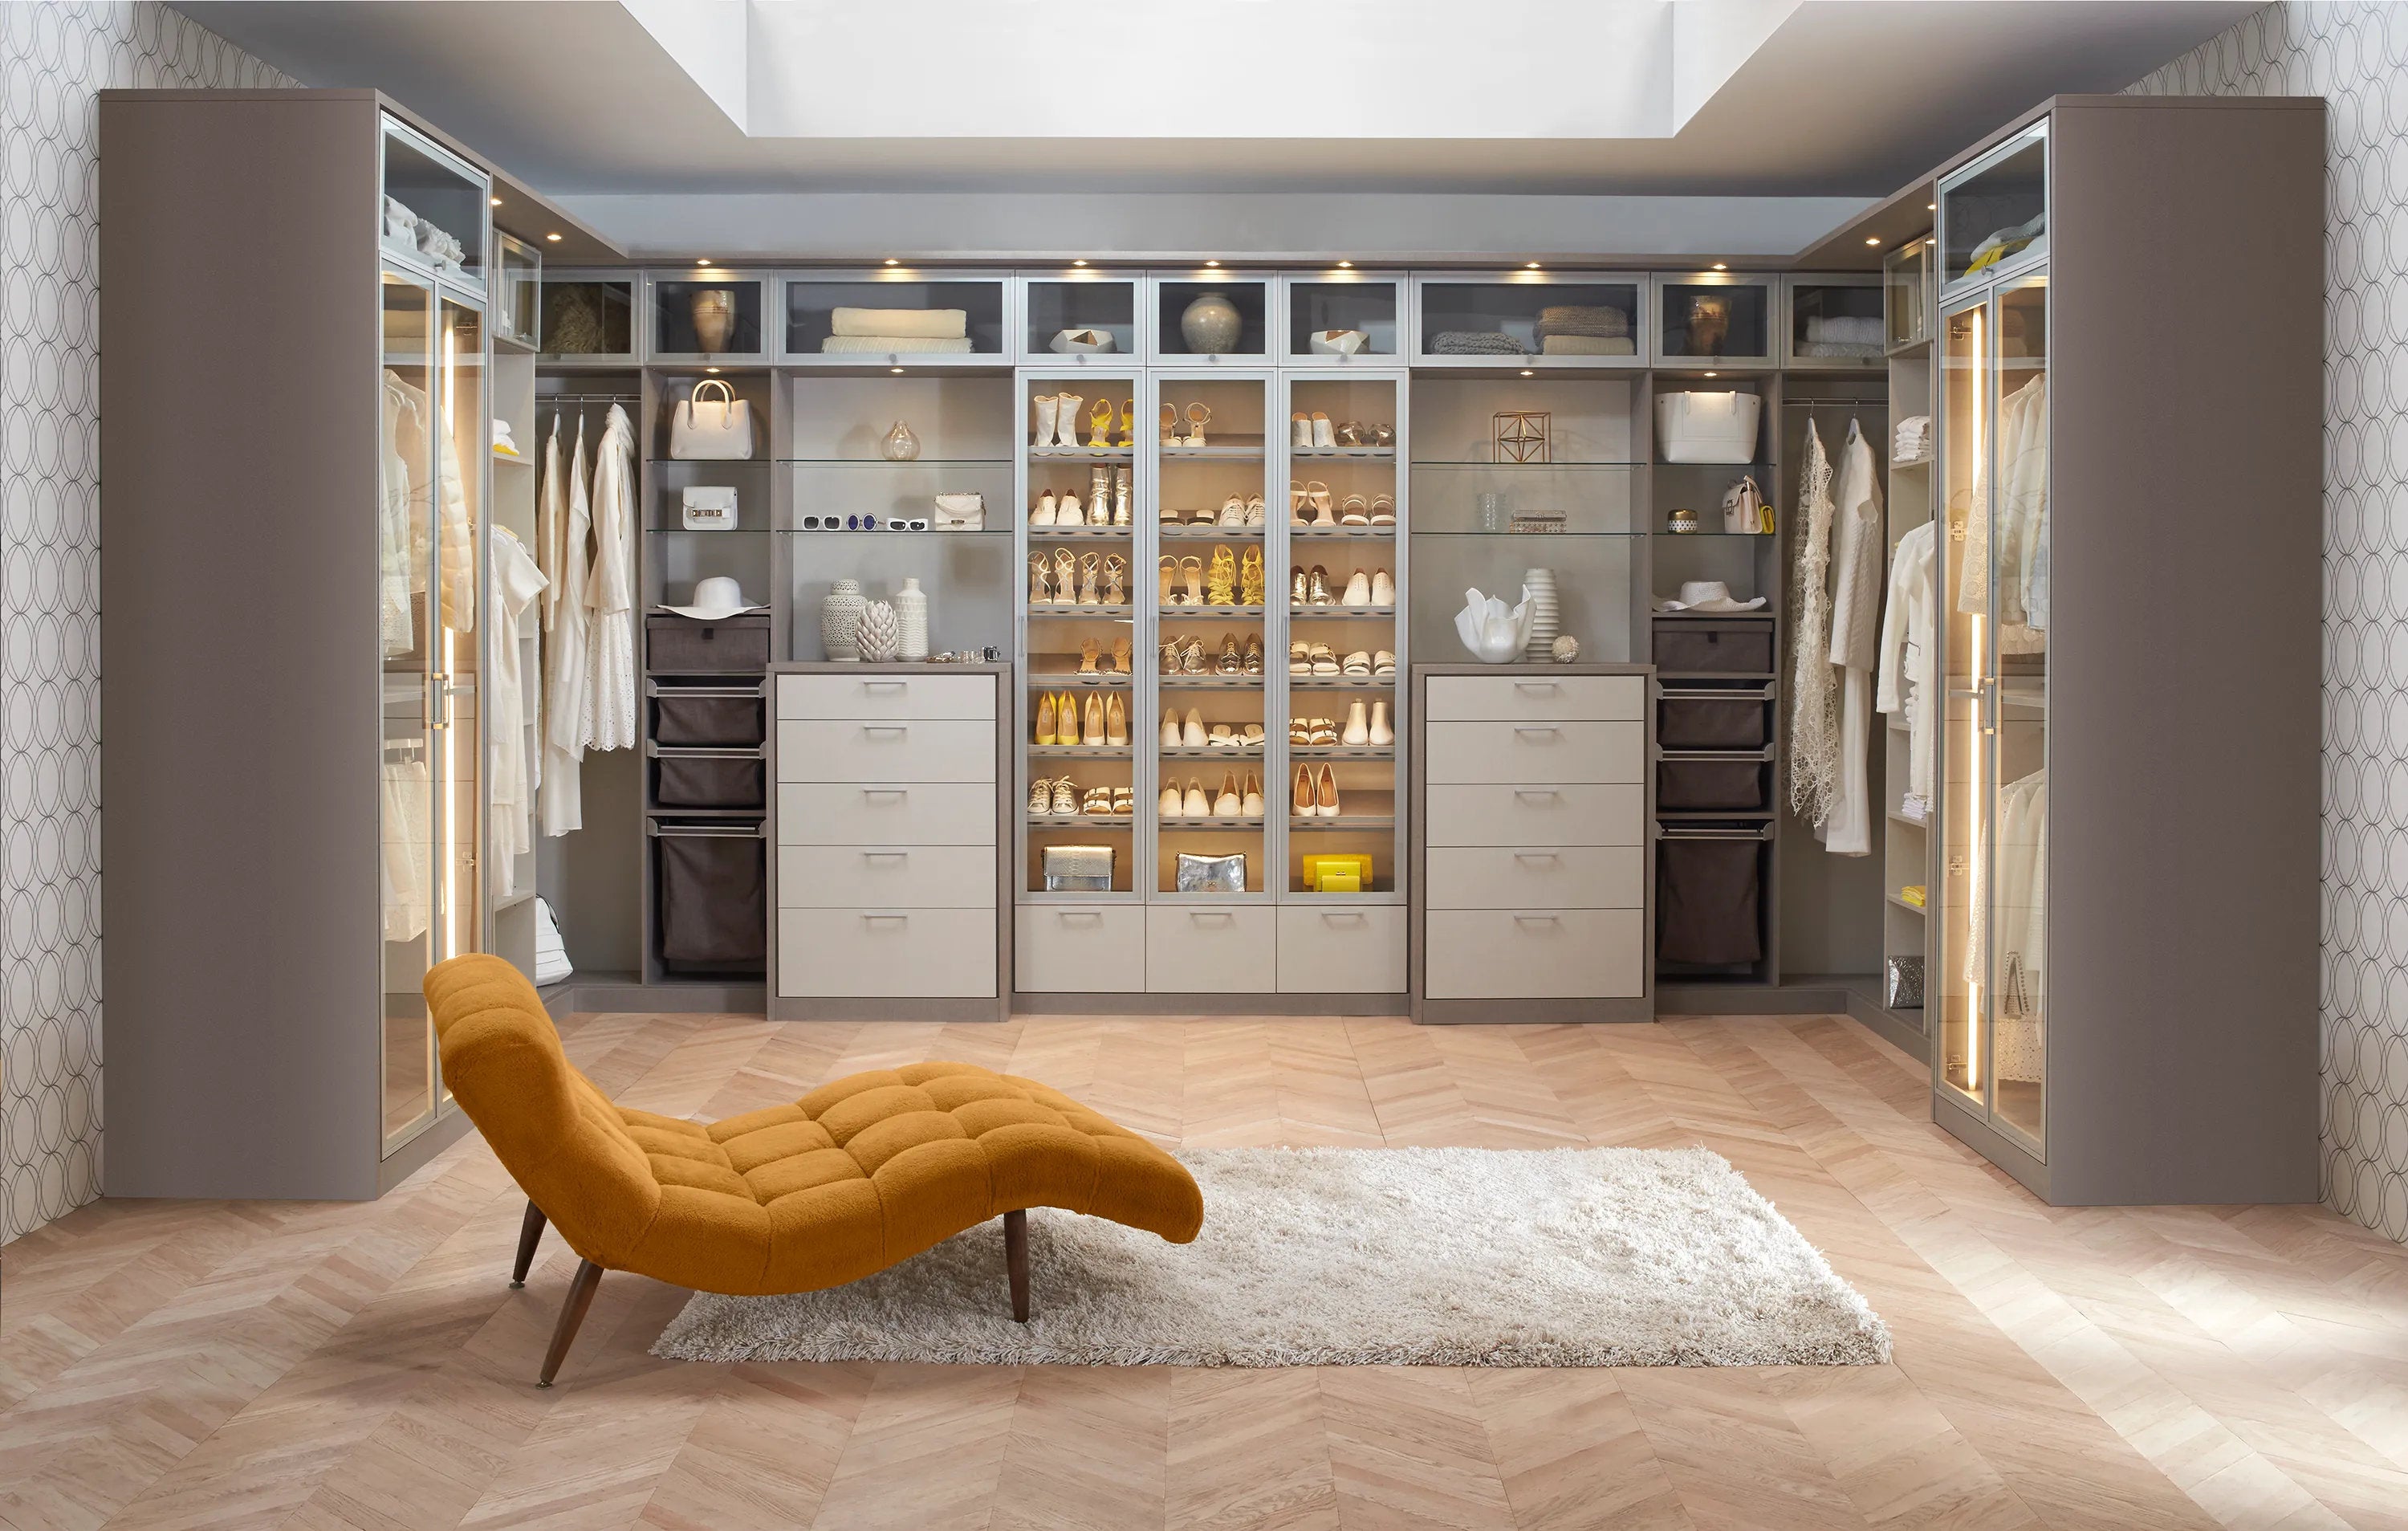 12 Closet Lighting Ideas That Will Wow You